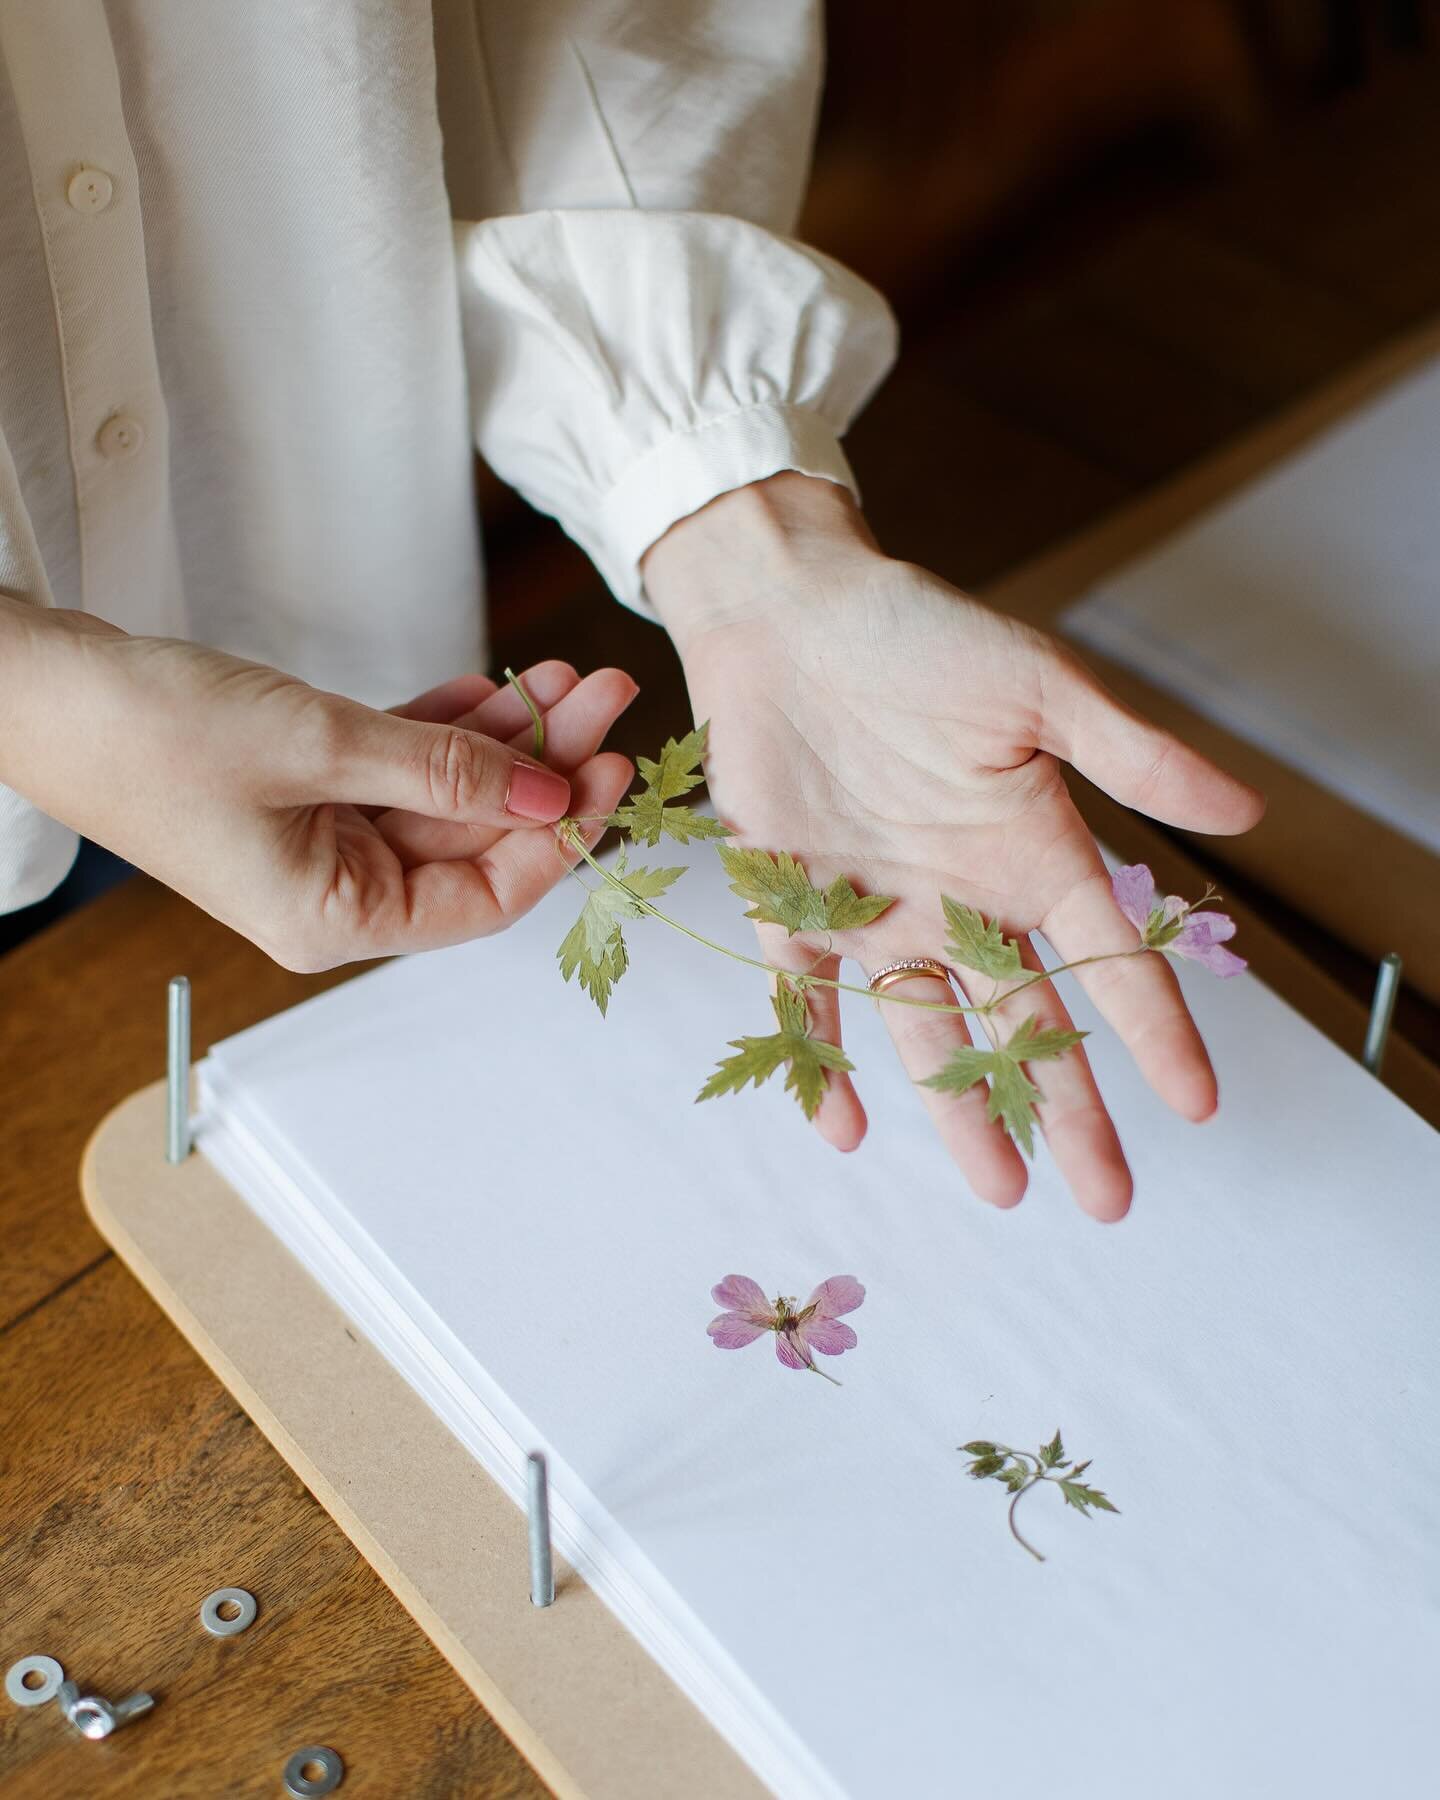 The art of flower pressing 🌷 

I design floral stationery collections quite literally from garden to paper. I pick flowers from my garden and local flower farm, which I then press for a number of weeks to use within the designs of my stationery. The